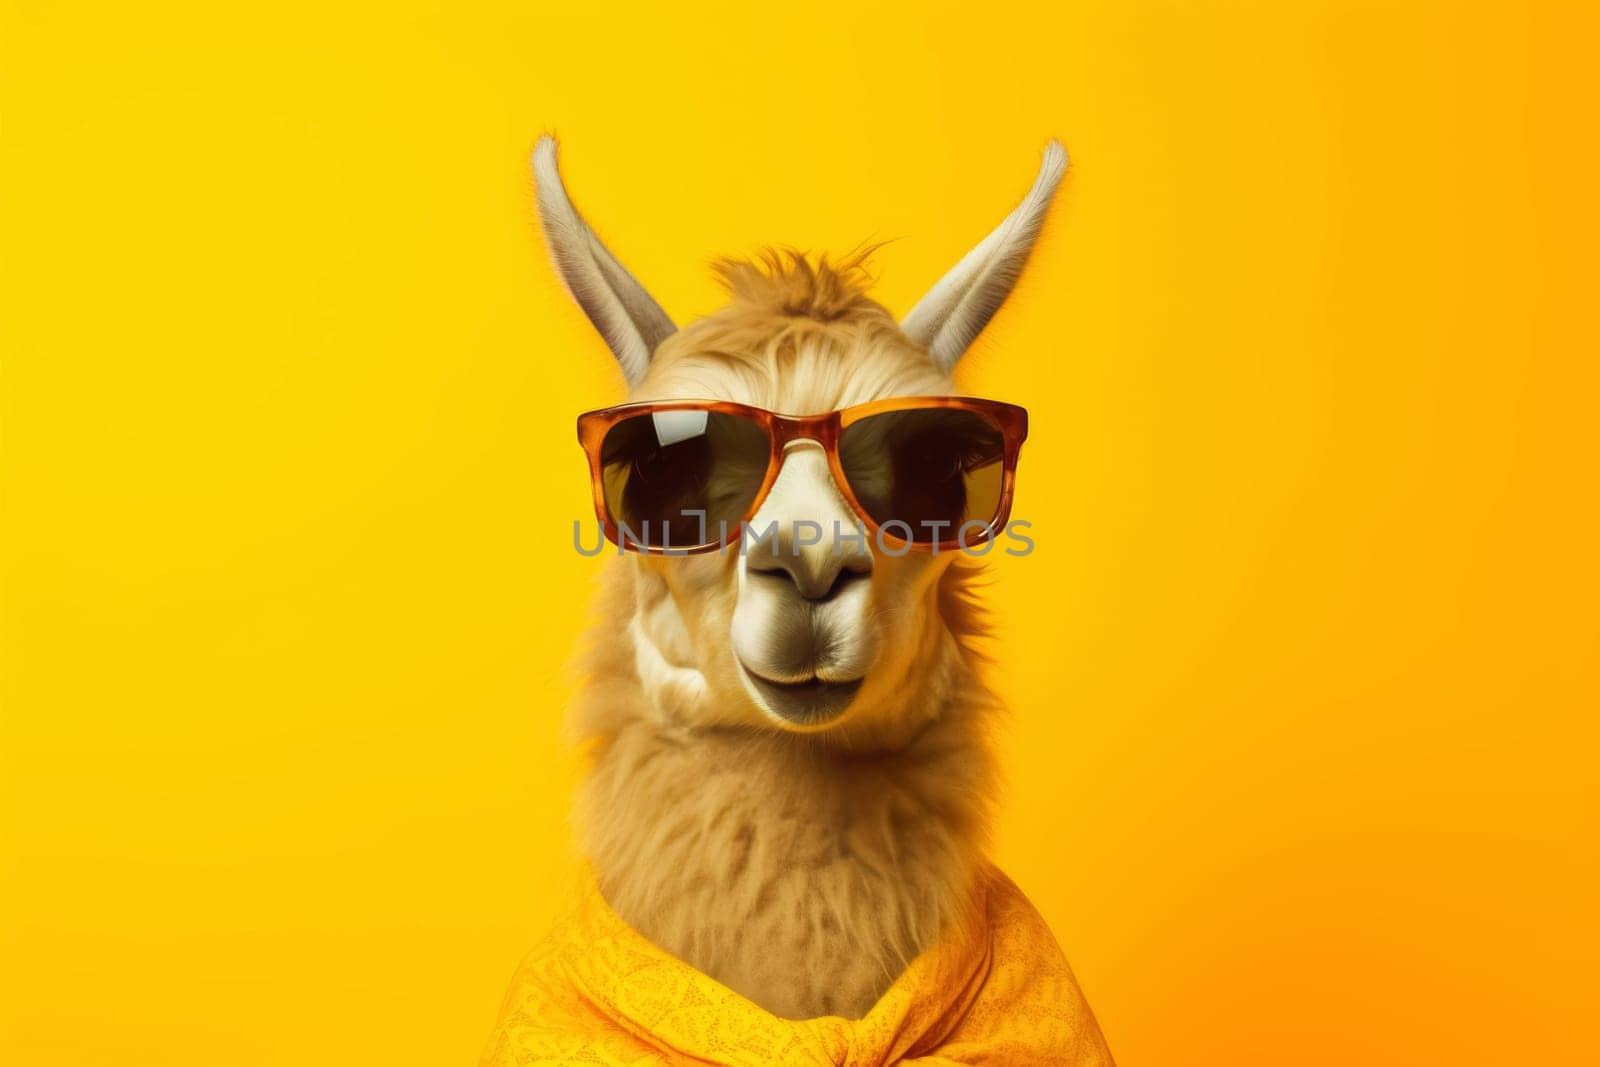 A quirky portrait of a llama donning sunglasses and a scarf, humorously styled for a summer holiday against a yellow background